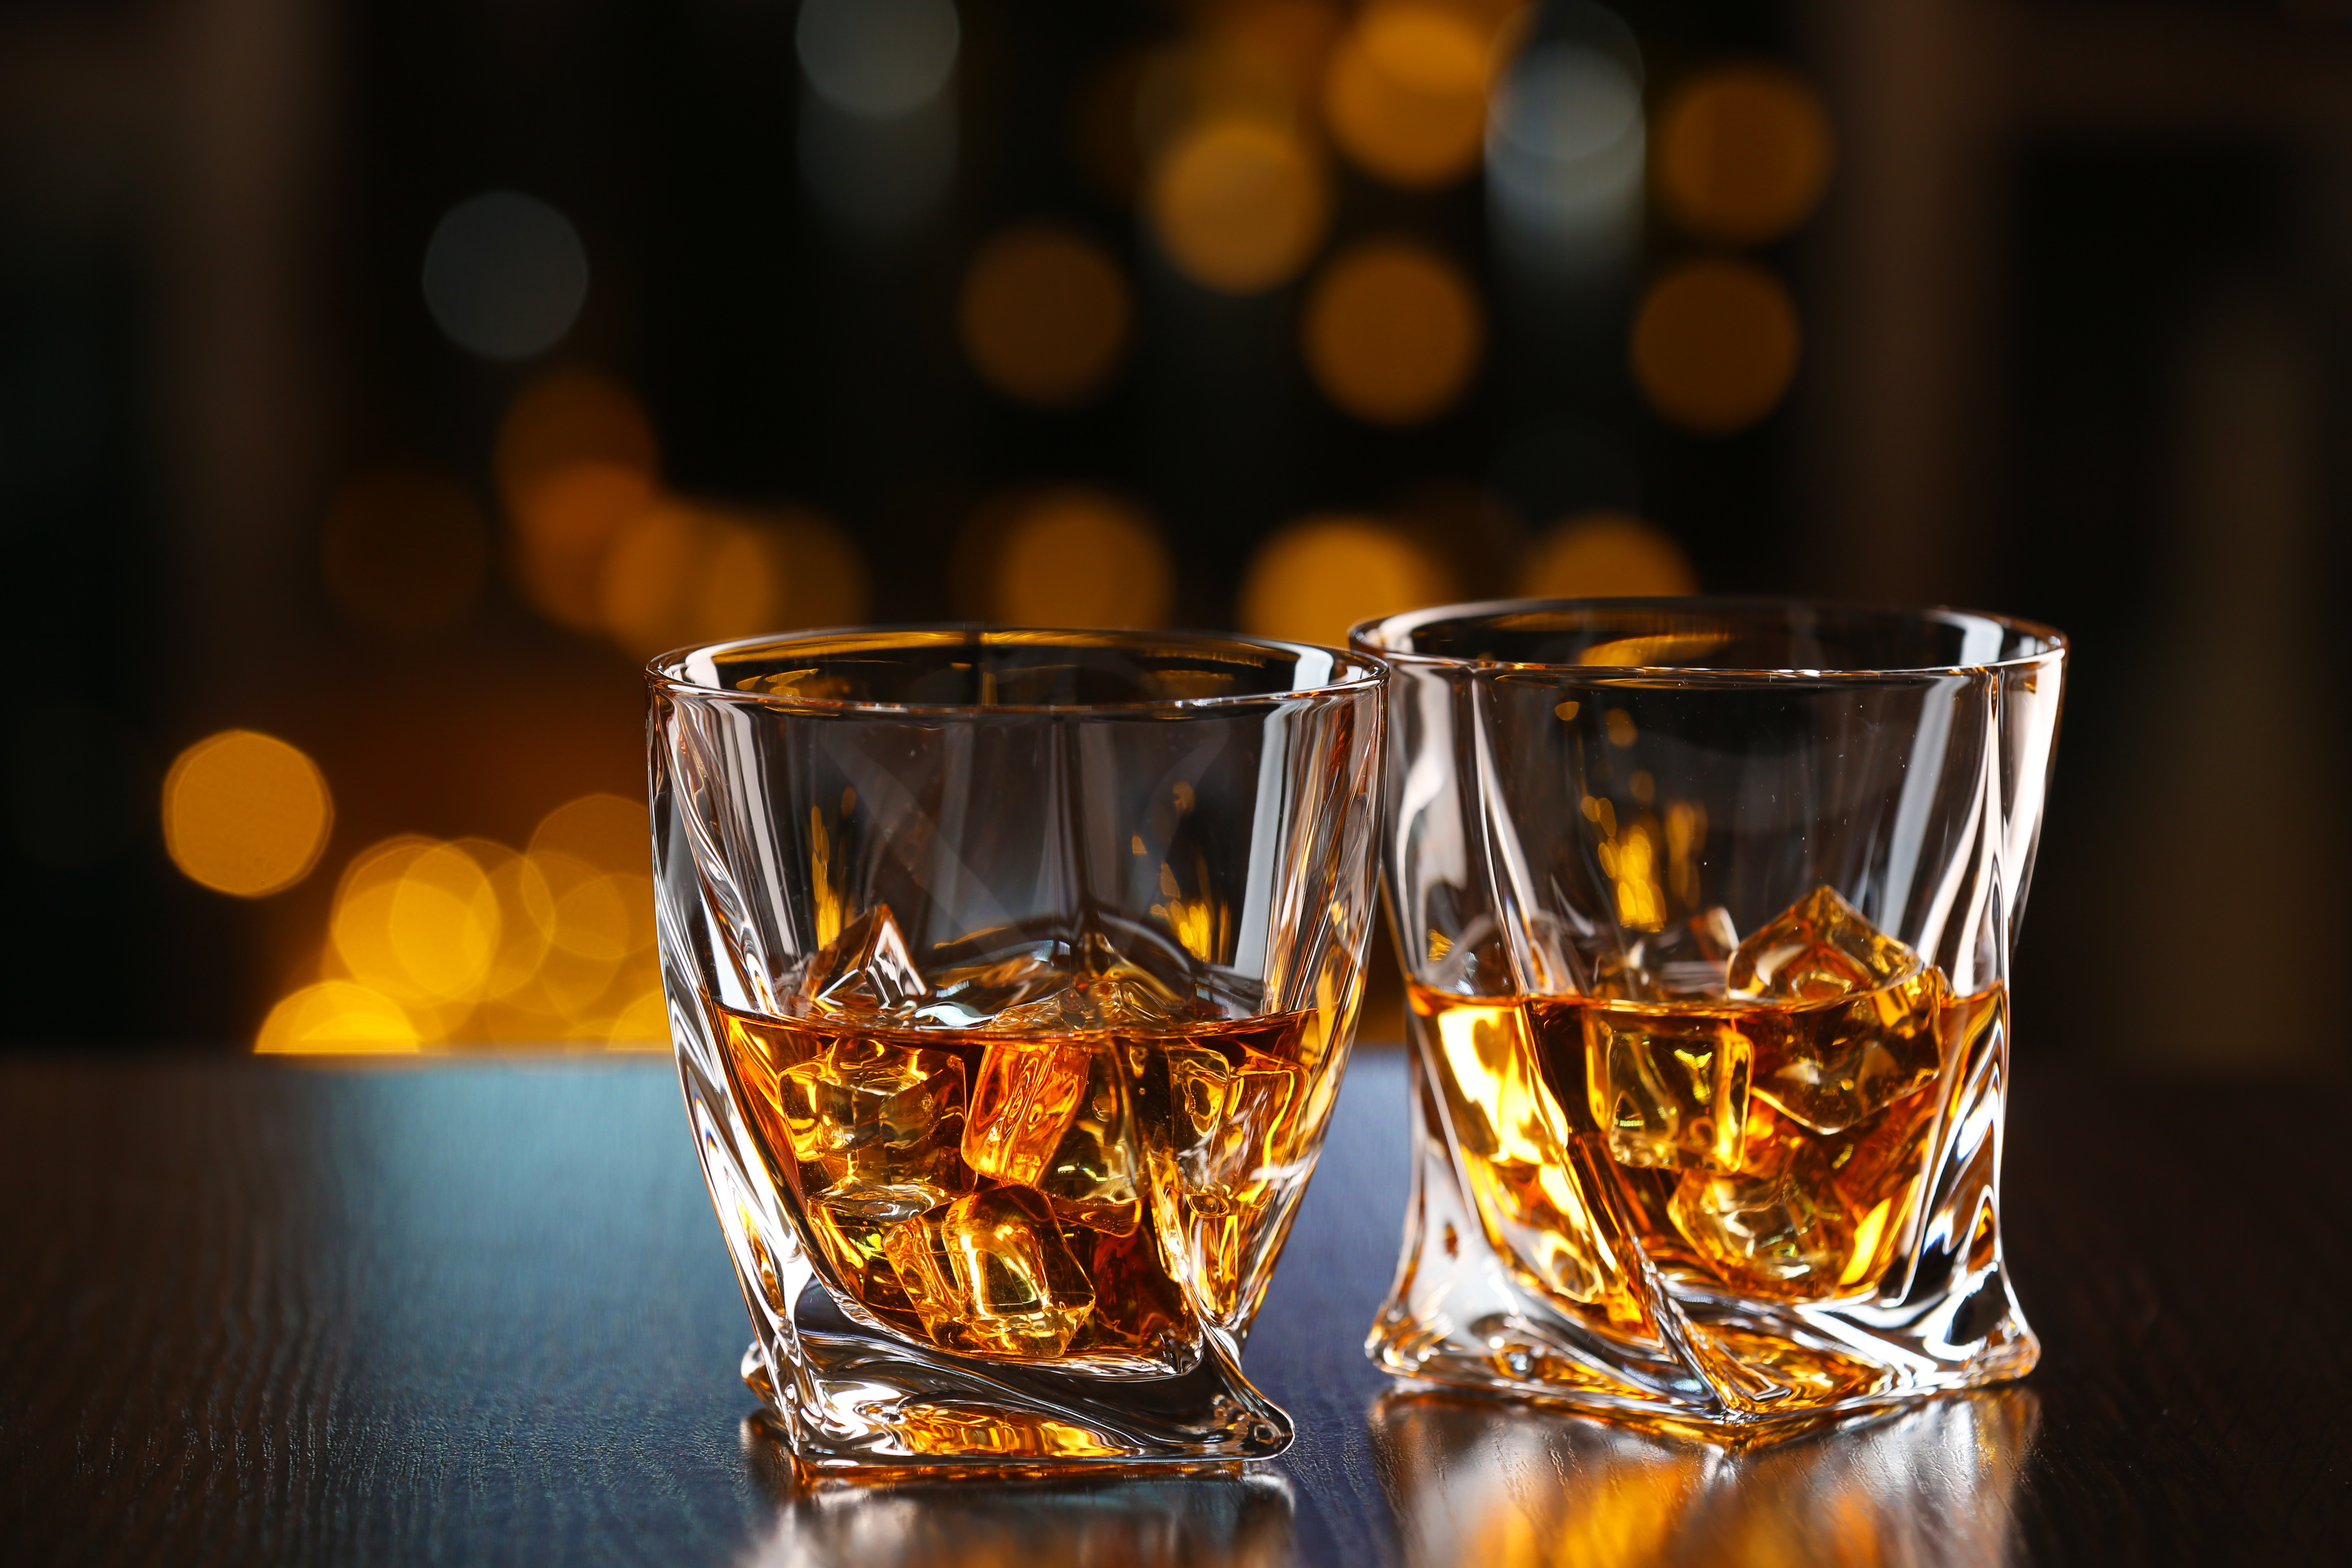 Whisky 101: How to pick your first bottle of whisky